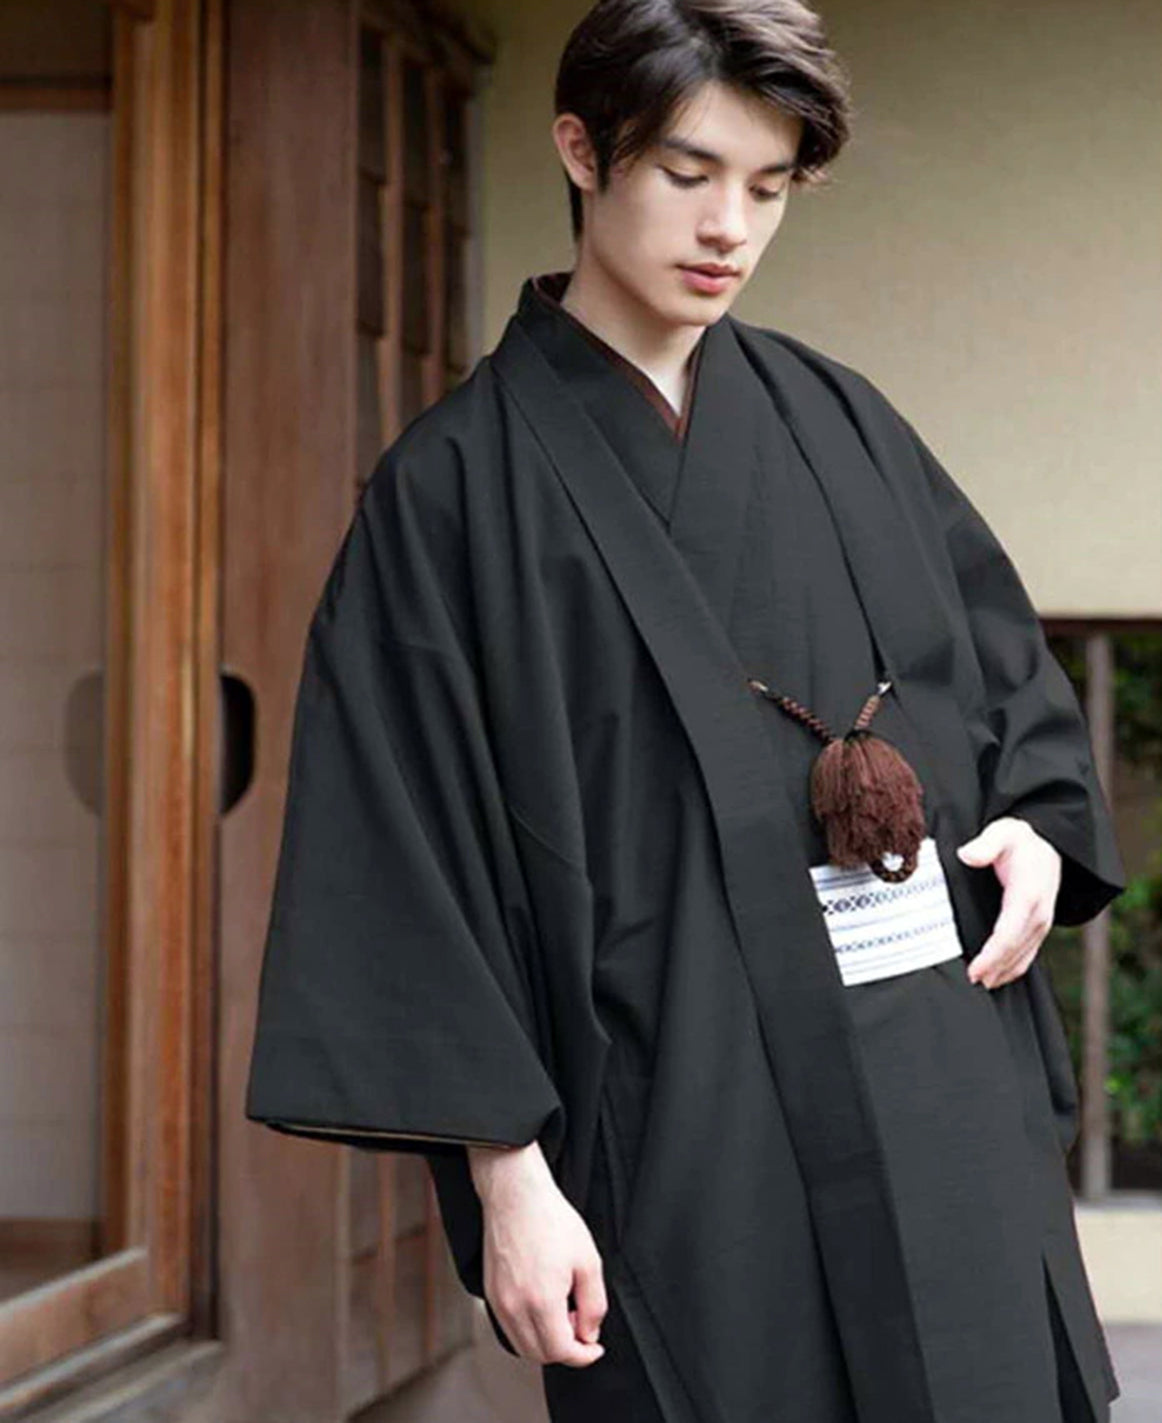 33 Traditional Japanese Clothing You'll Want to Wear – Japan Objects Store